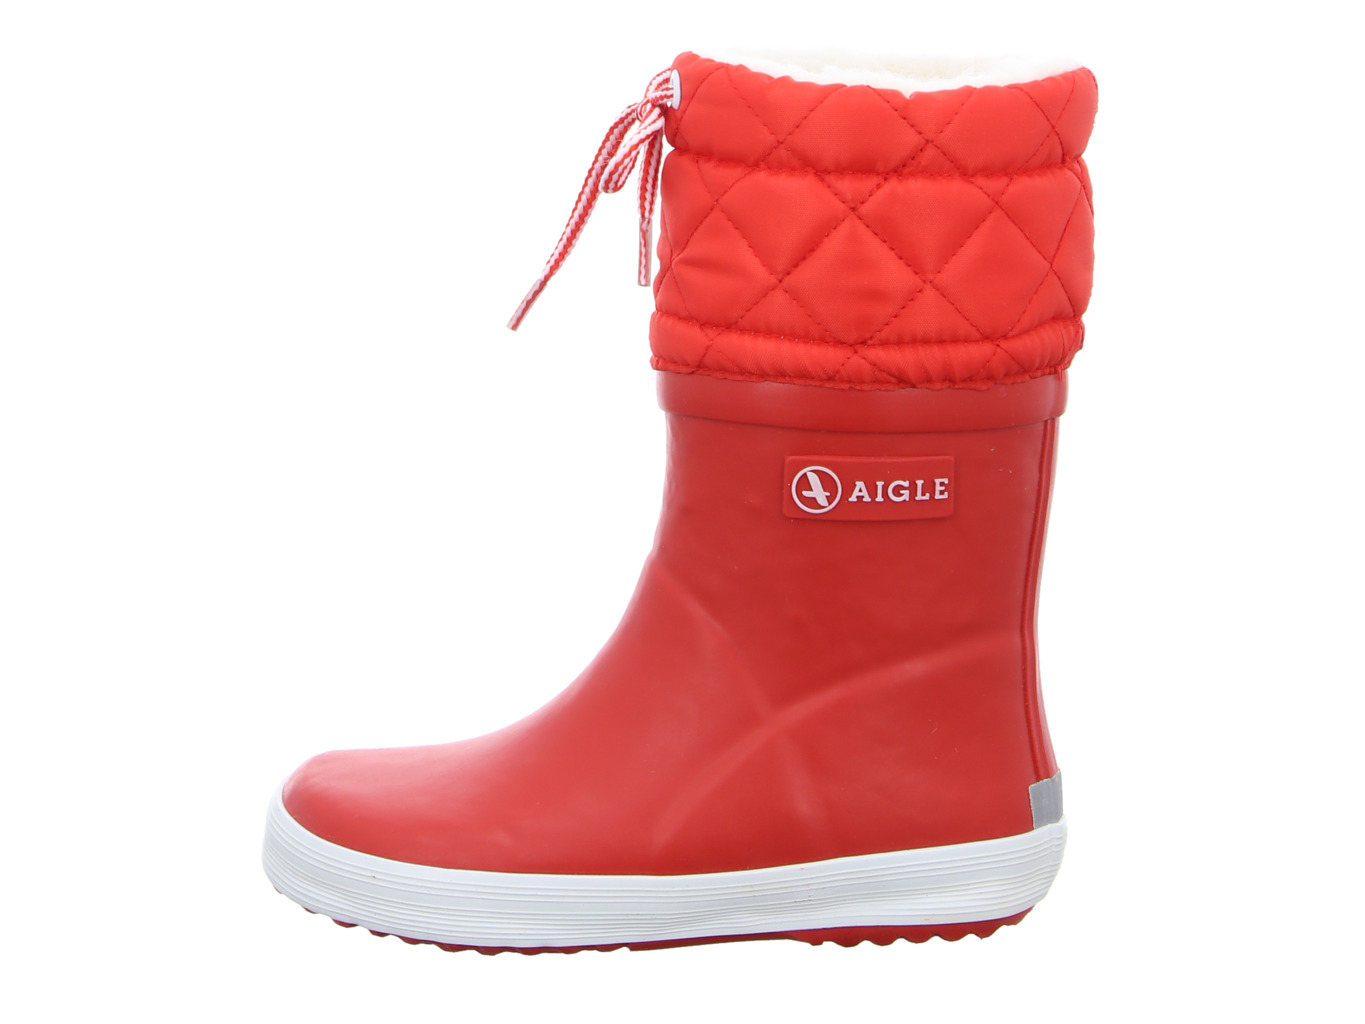 aigle_giboulee_rot_24538_rouge_3127